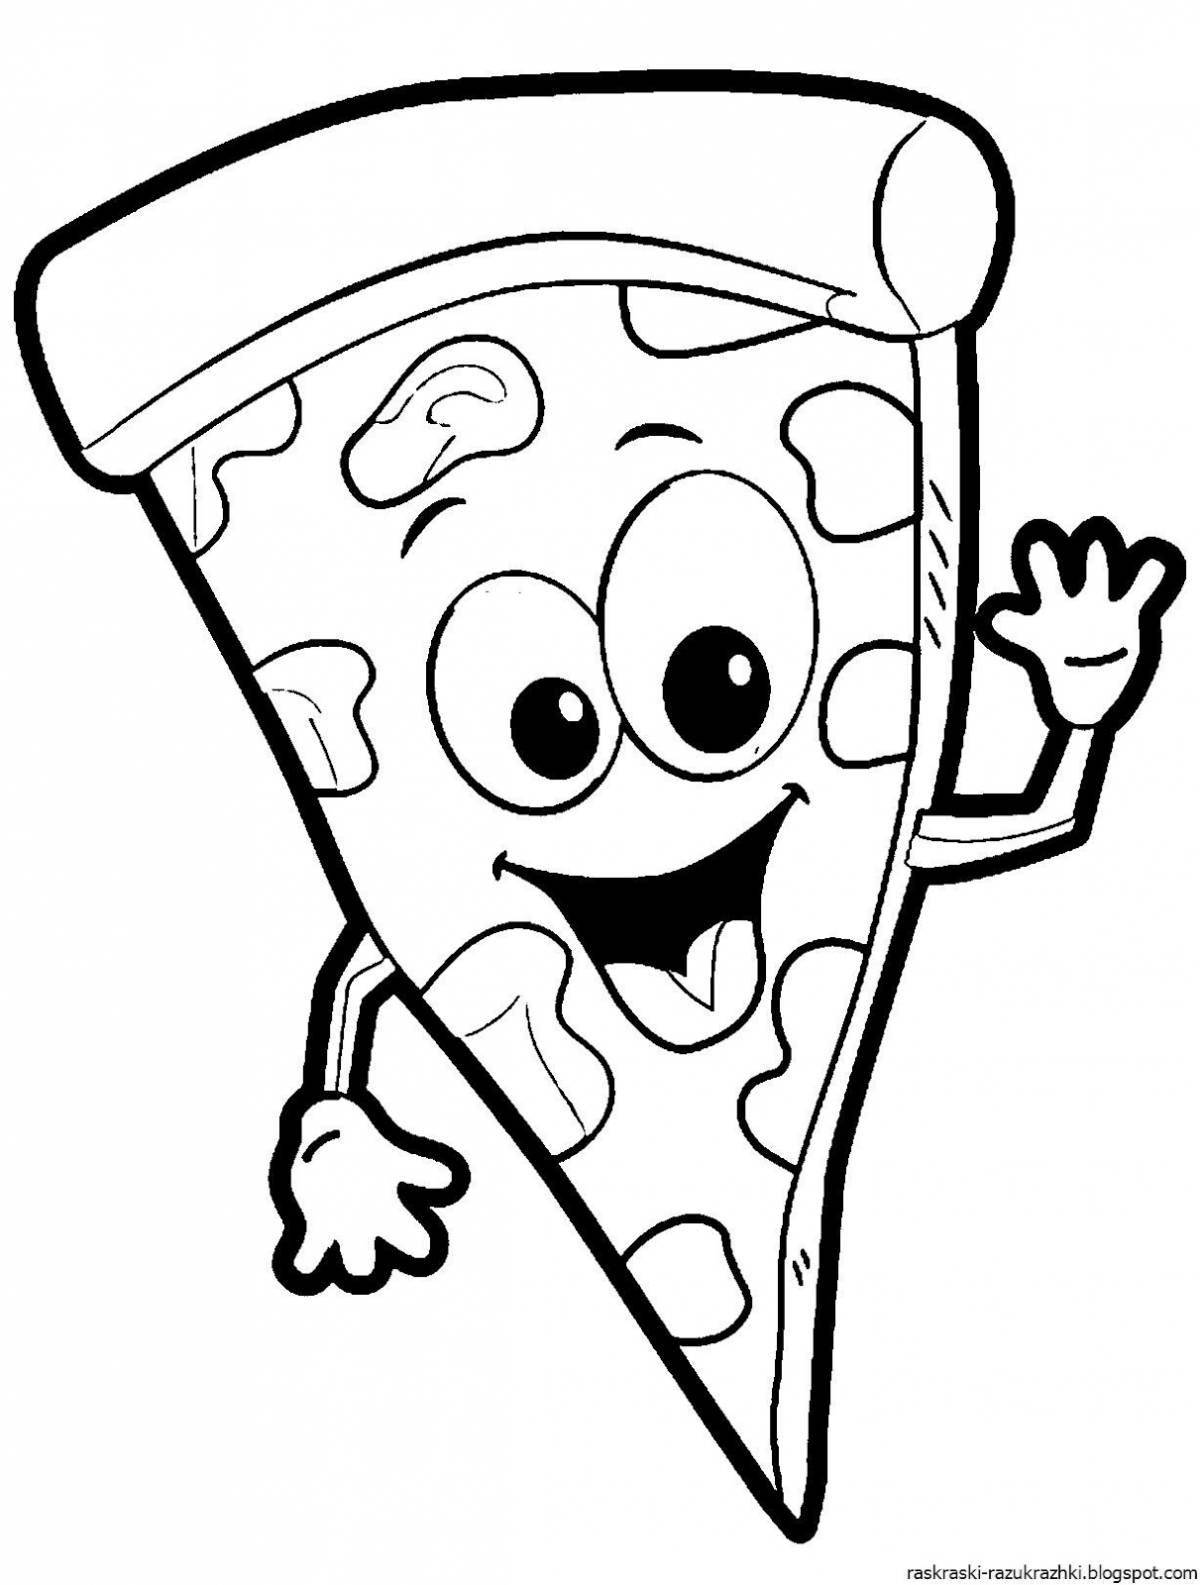 Thankful pizza coloring page